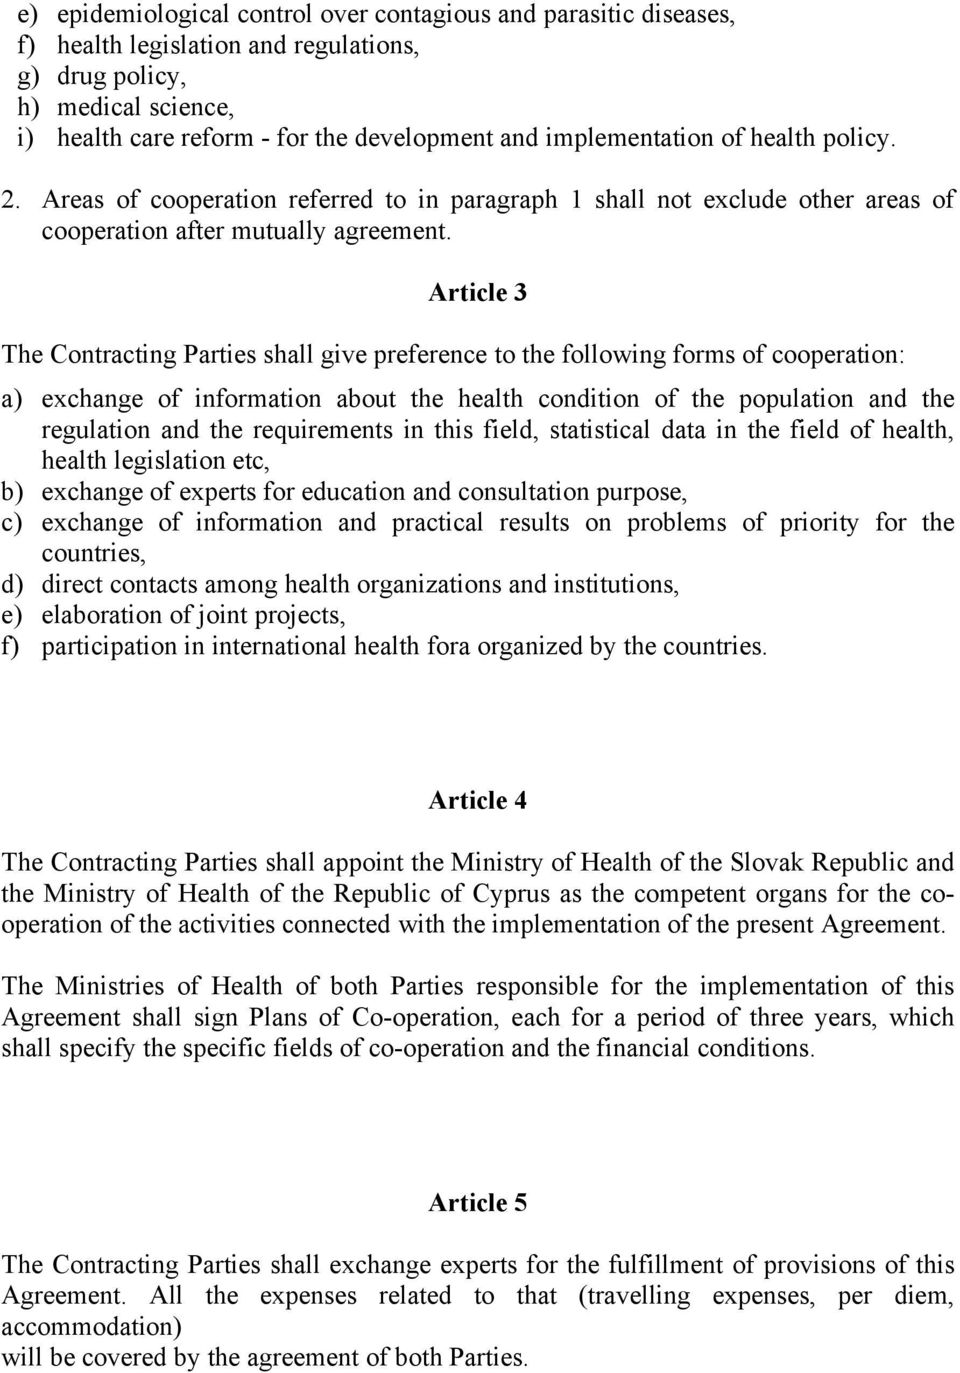 Article 3 The Contracting Parties shall give preference to the following forms of cooperation: a) exchange of information about the health condition of the population and the regulation and the